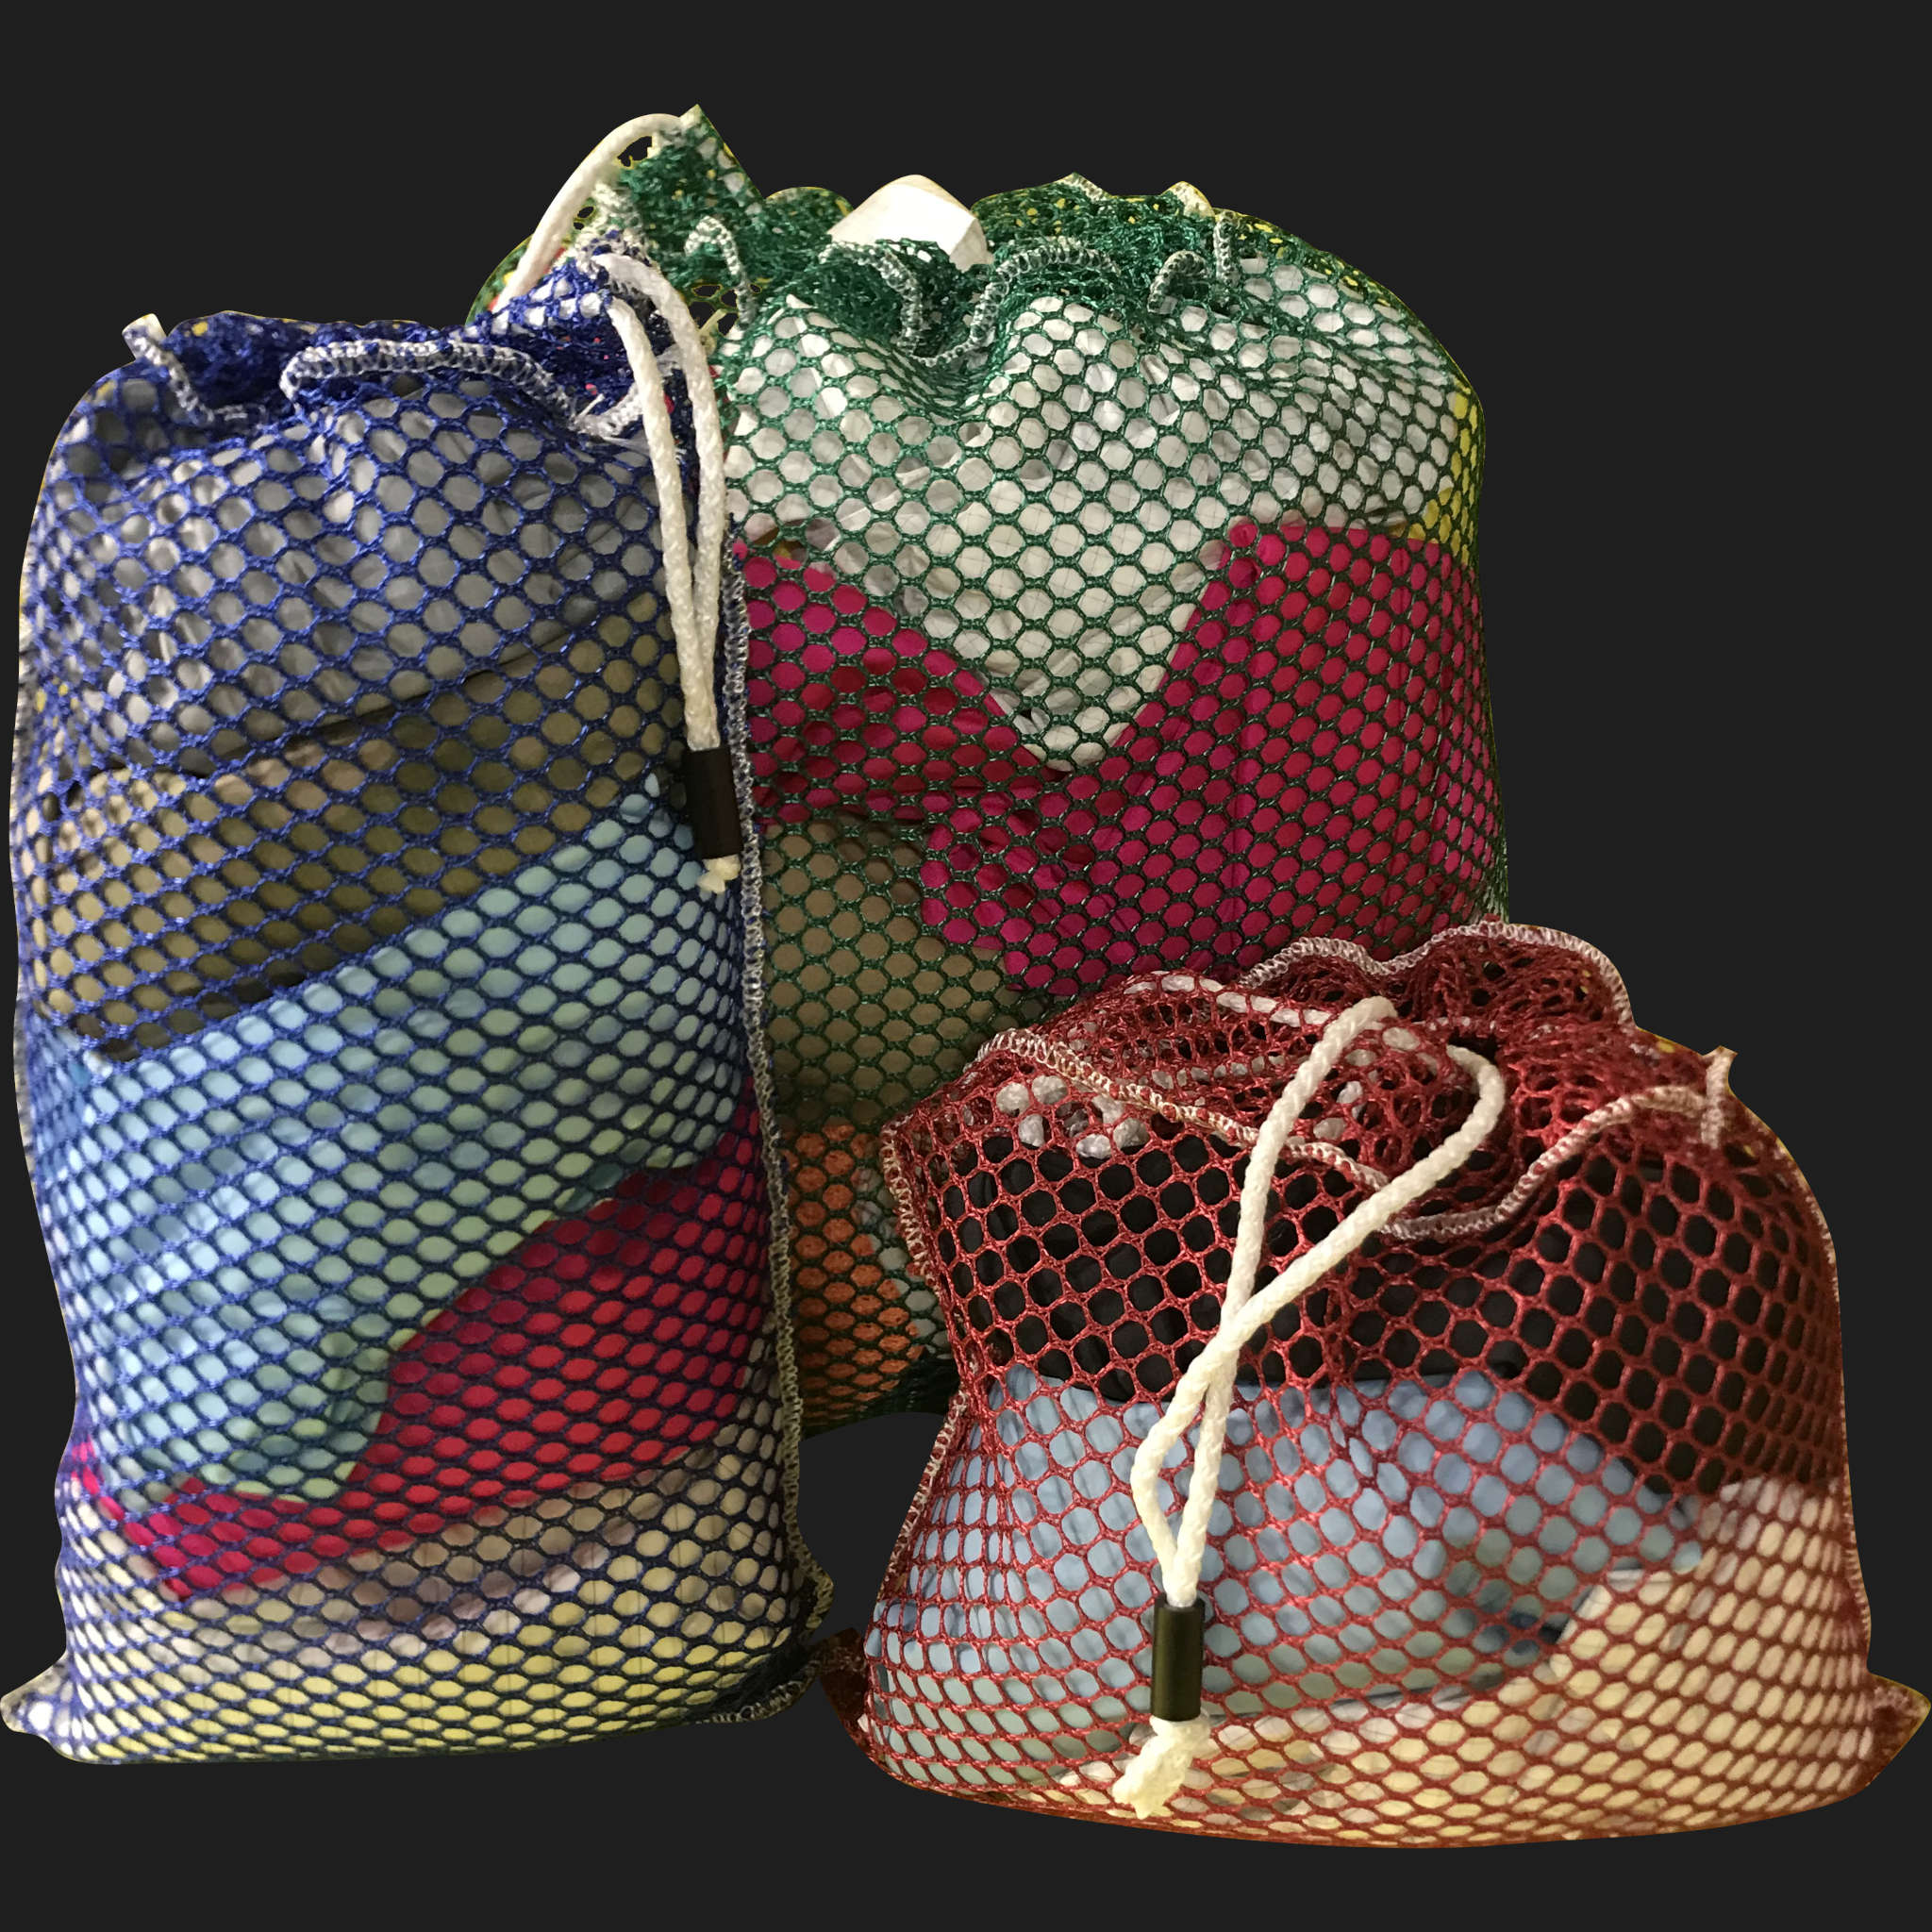 24" x 52" Customized Mesh-Net-Laundry Bags Heavy Duty with Cord and barrellock closure